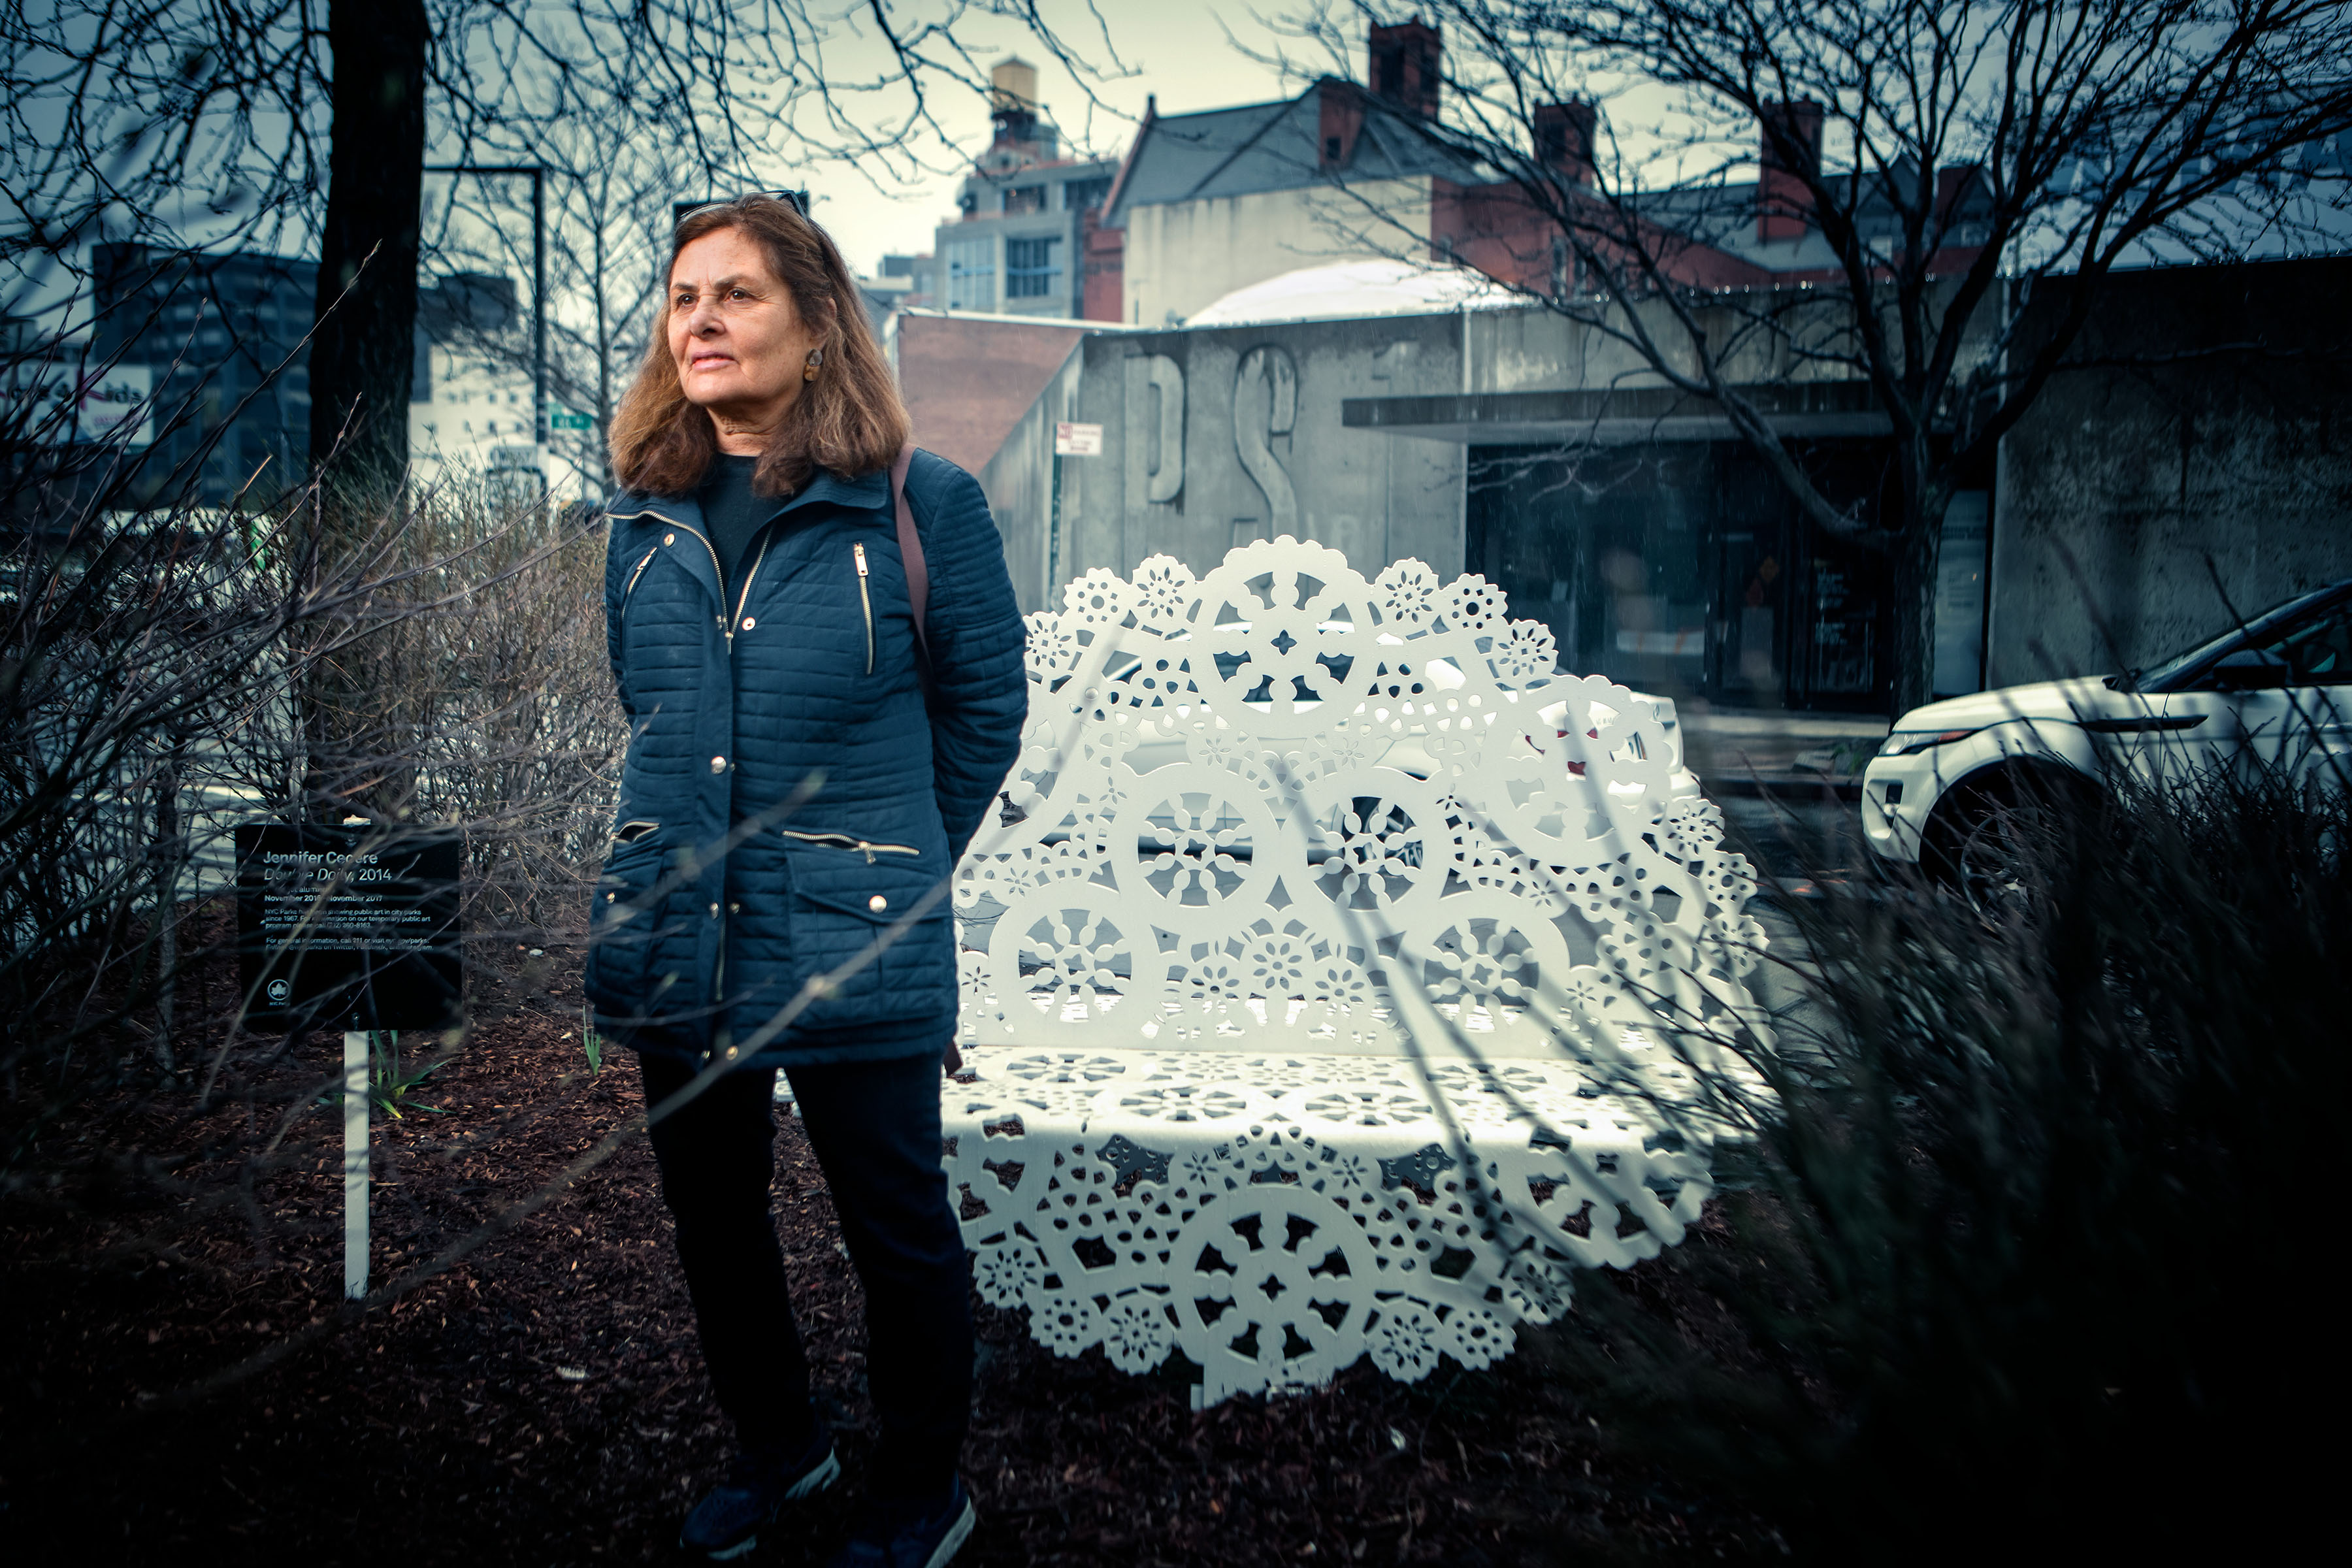 A woman with shoulder-length brown hair, dressed in a blue coat, stands in front of a large white doily sculpture outside.